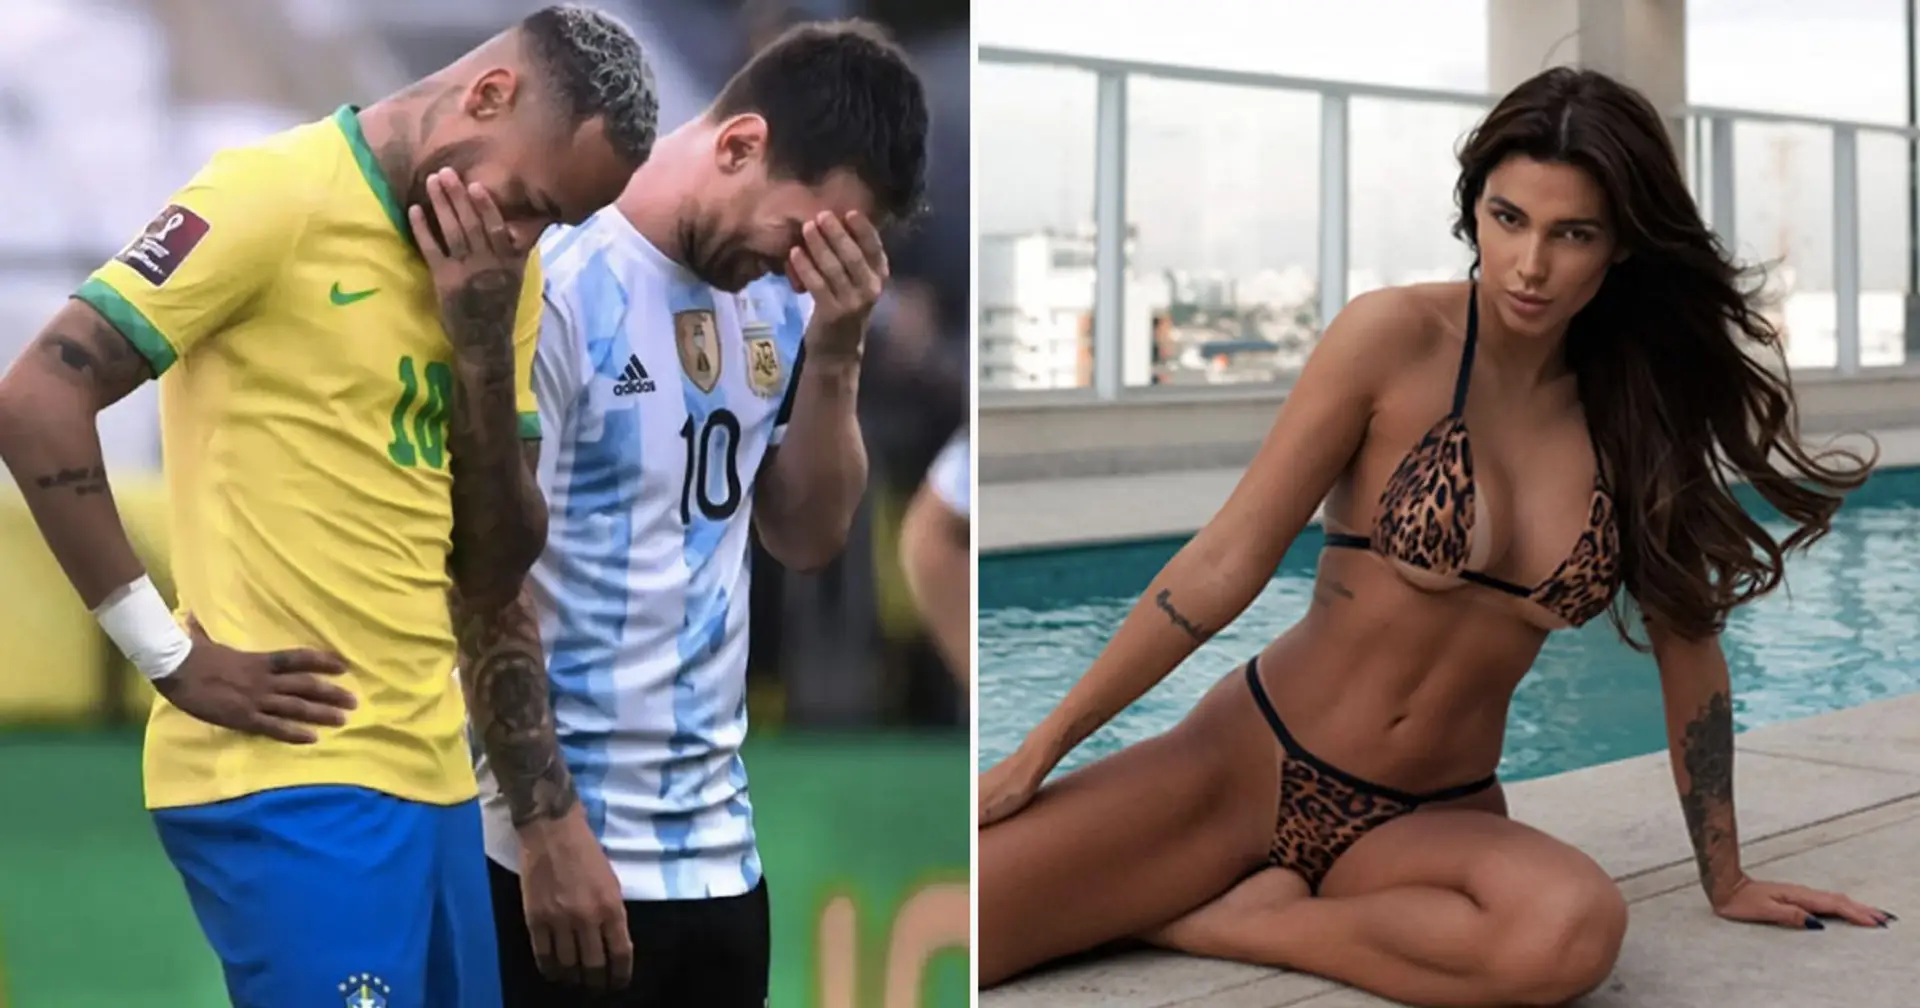 Brazilian model says Neymar 'spent night' with her, Messi was also looking for a date